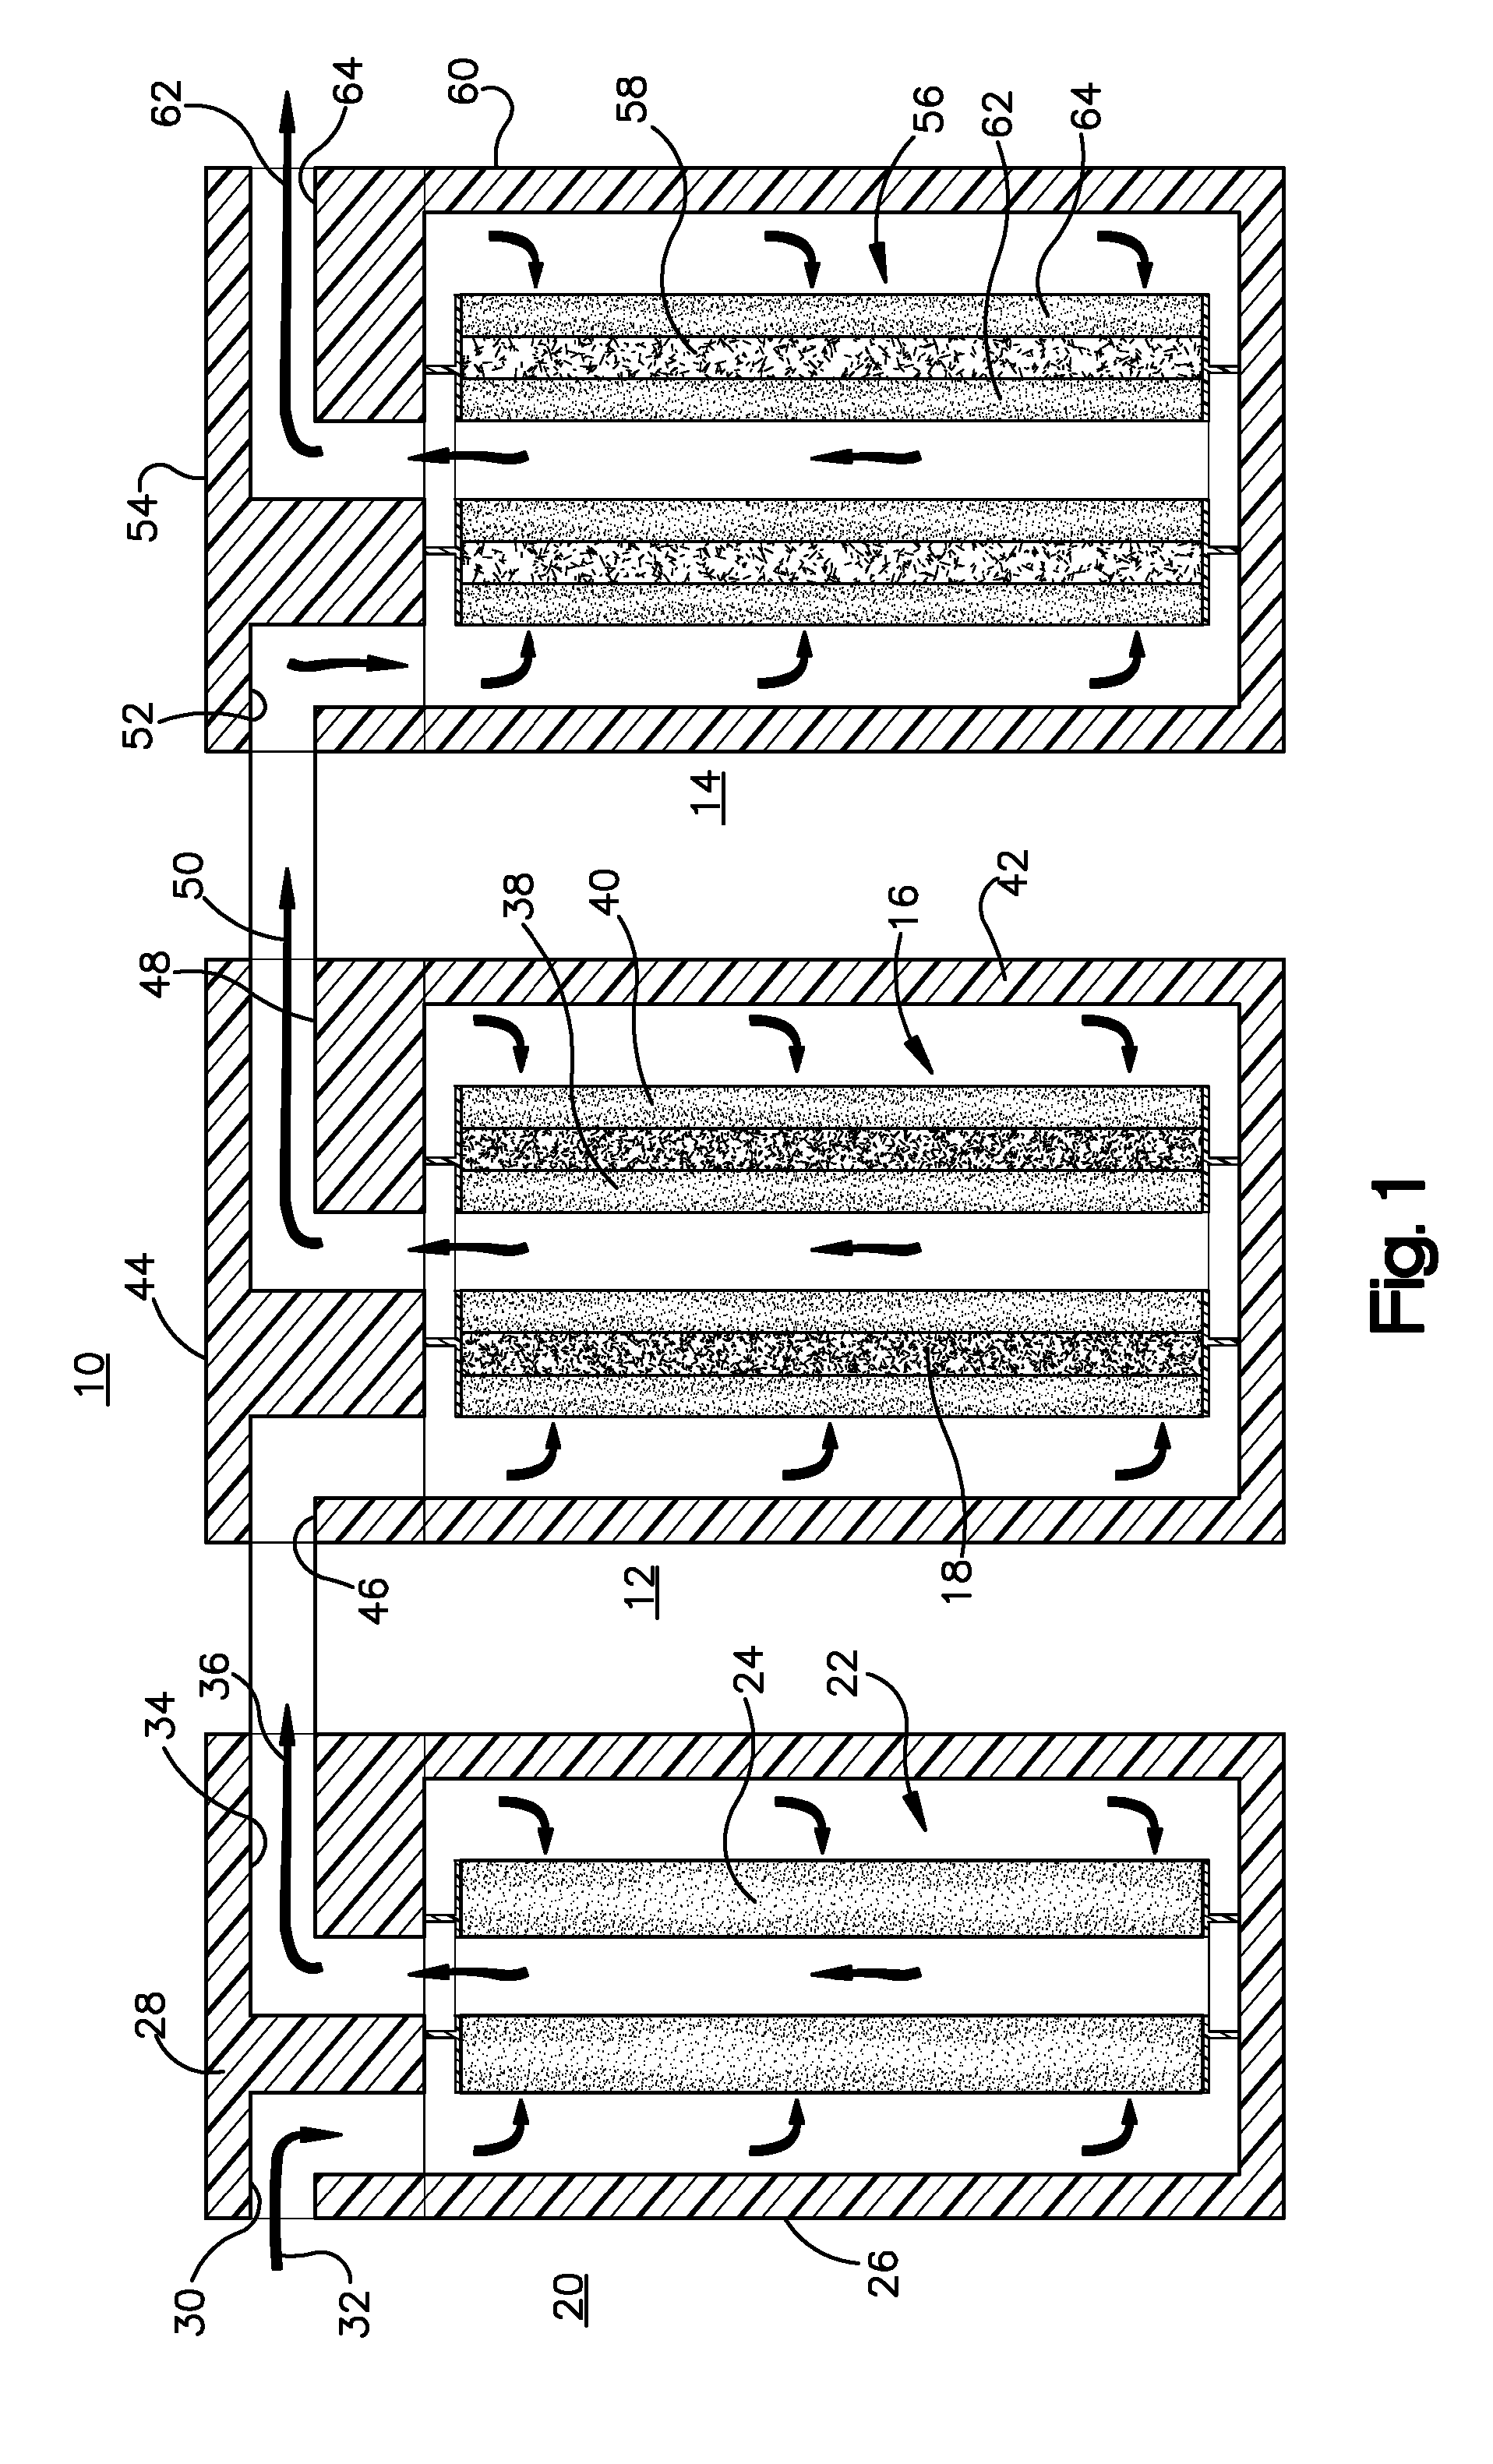 Treating liquids with pH adjuster-based system